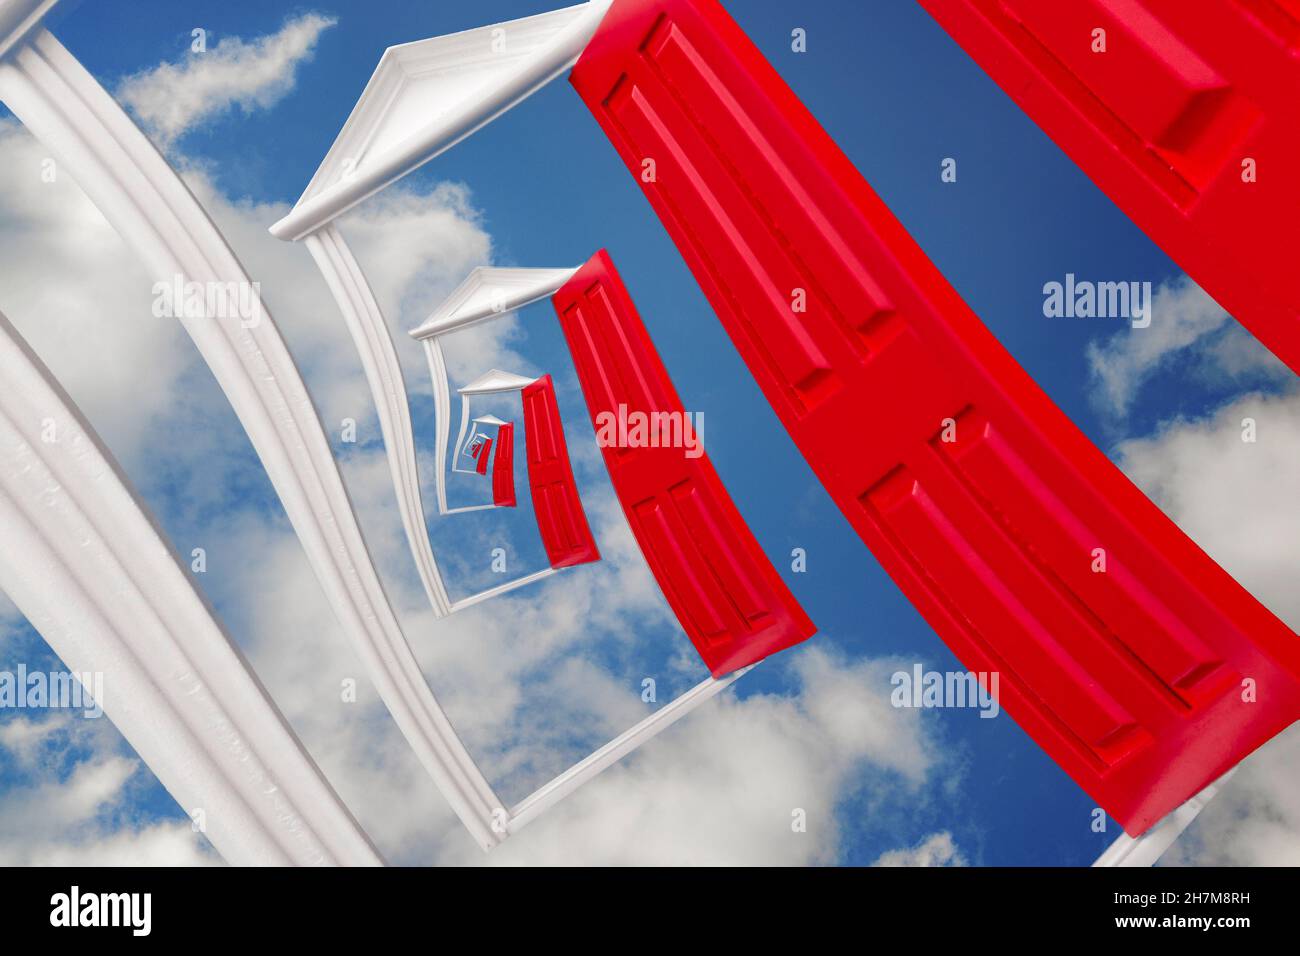 Infinity, dreaming and mysterious esoteric dreamy experience concept with surreal droste effect on a door isolated on cloudy blue sky background Stock Photo